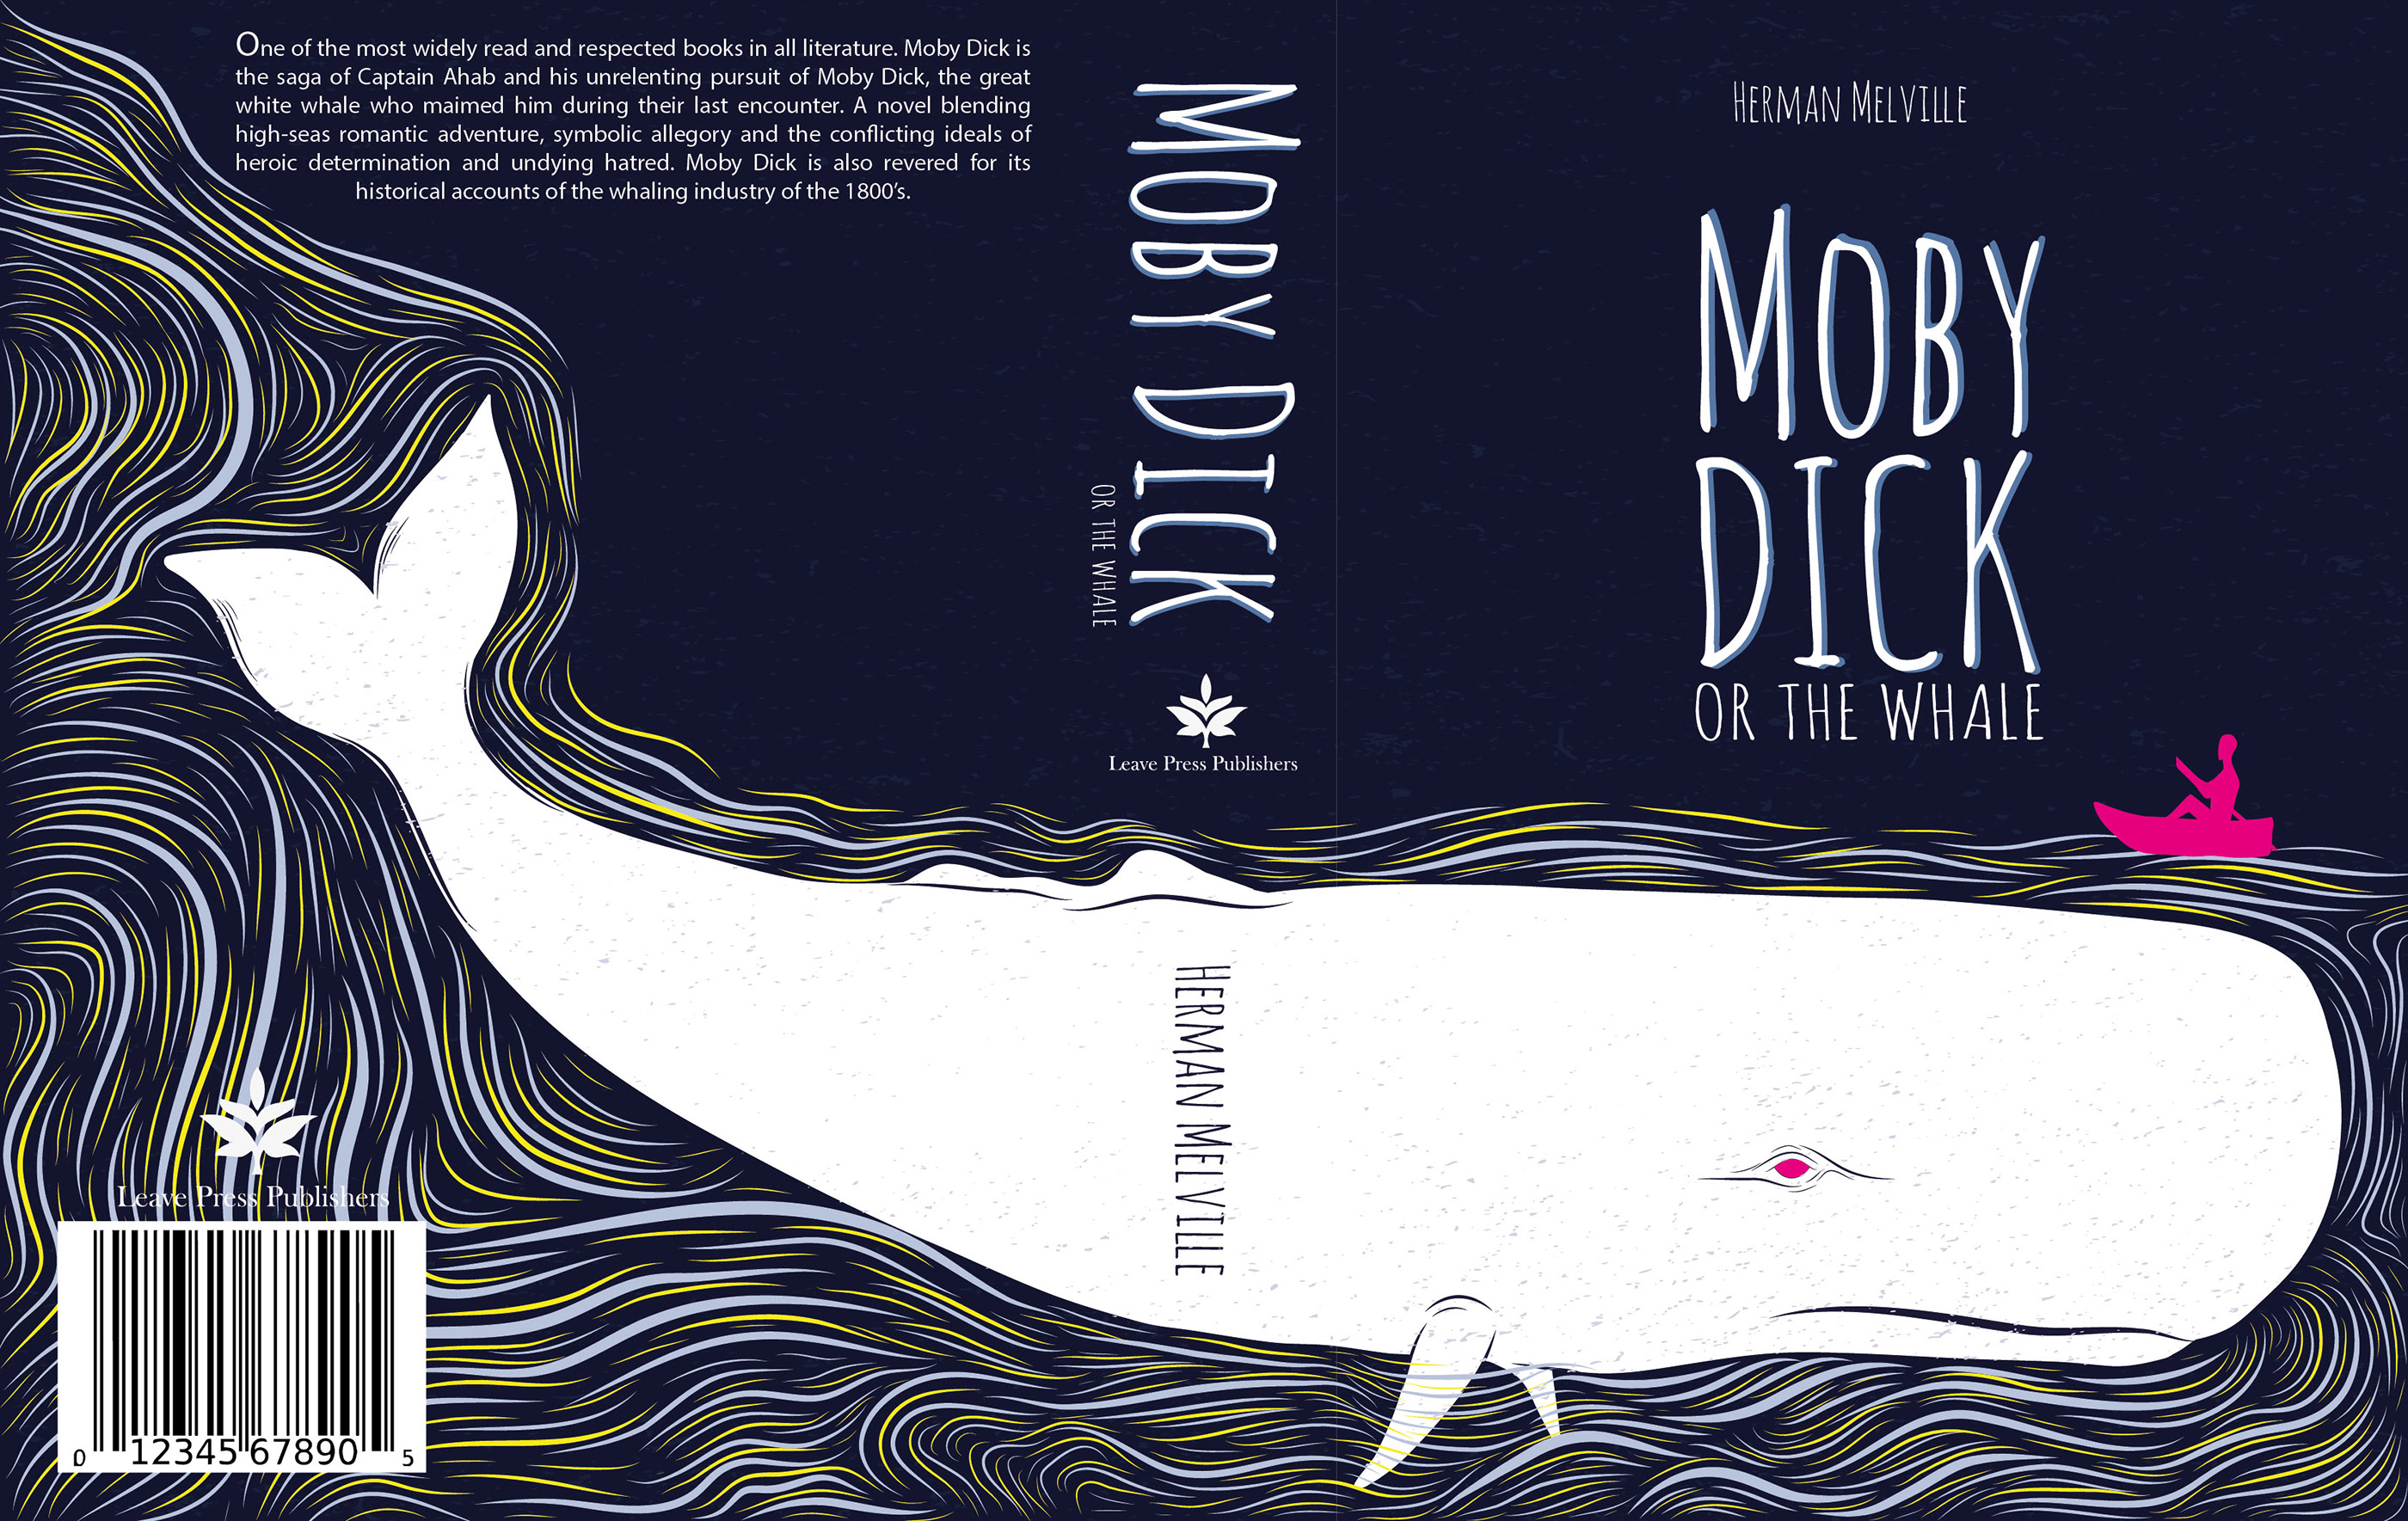 Moby dick's sterling